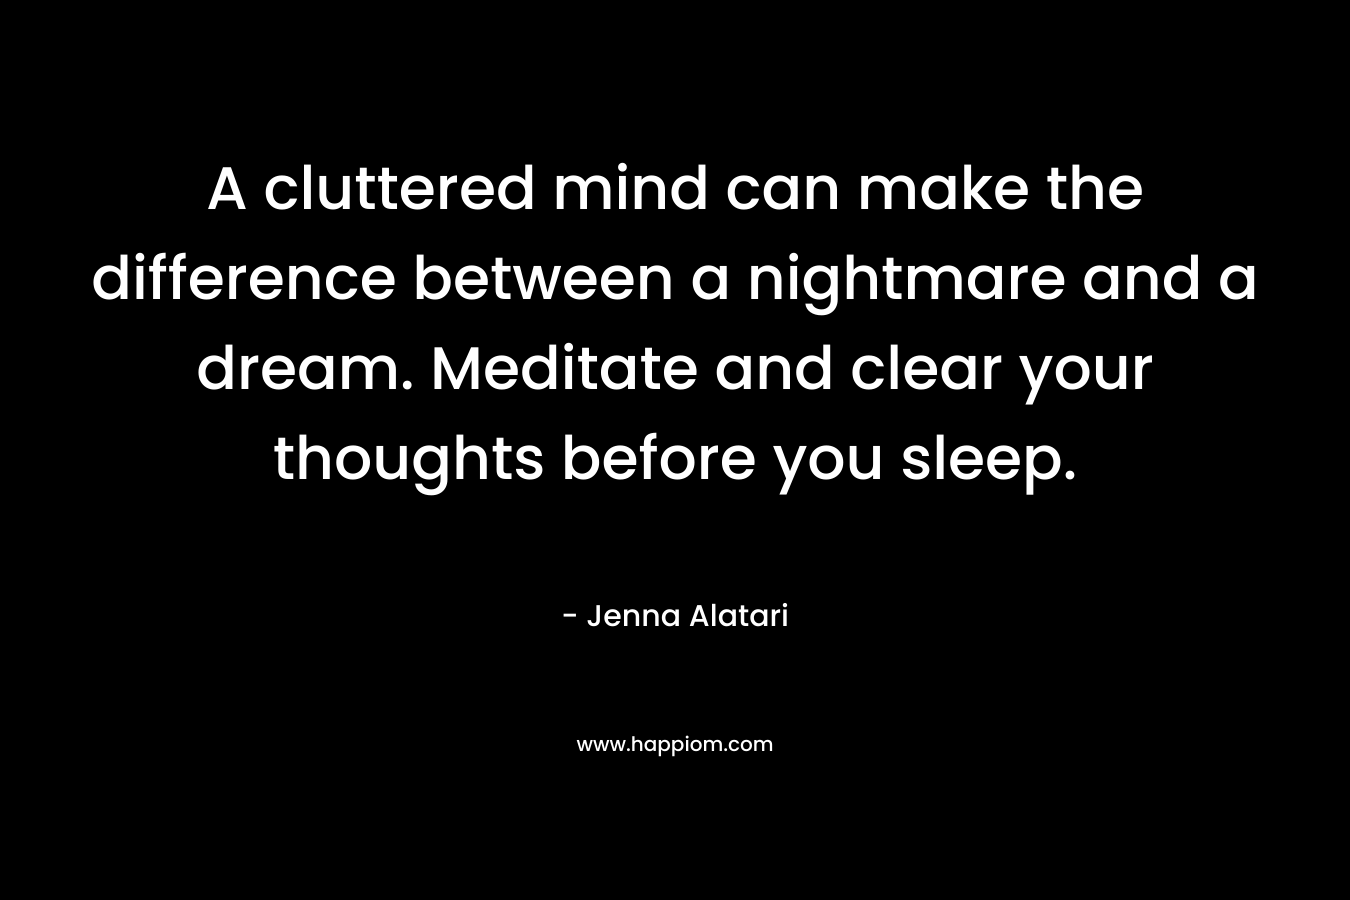 A cluttered mind can make the difference between a nightmare and a dream. Meditate and clear your thoughts before you sleep. – Jenna Alatari